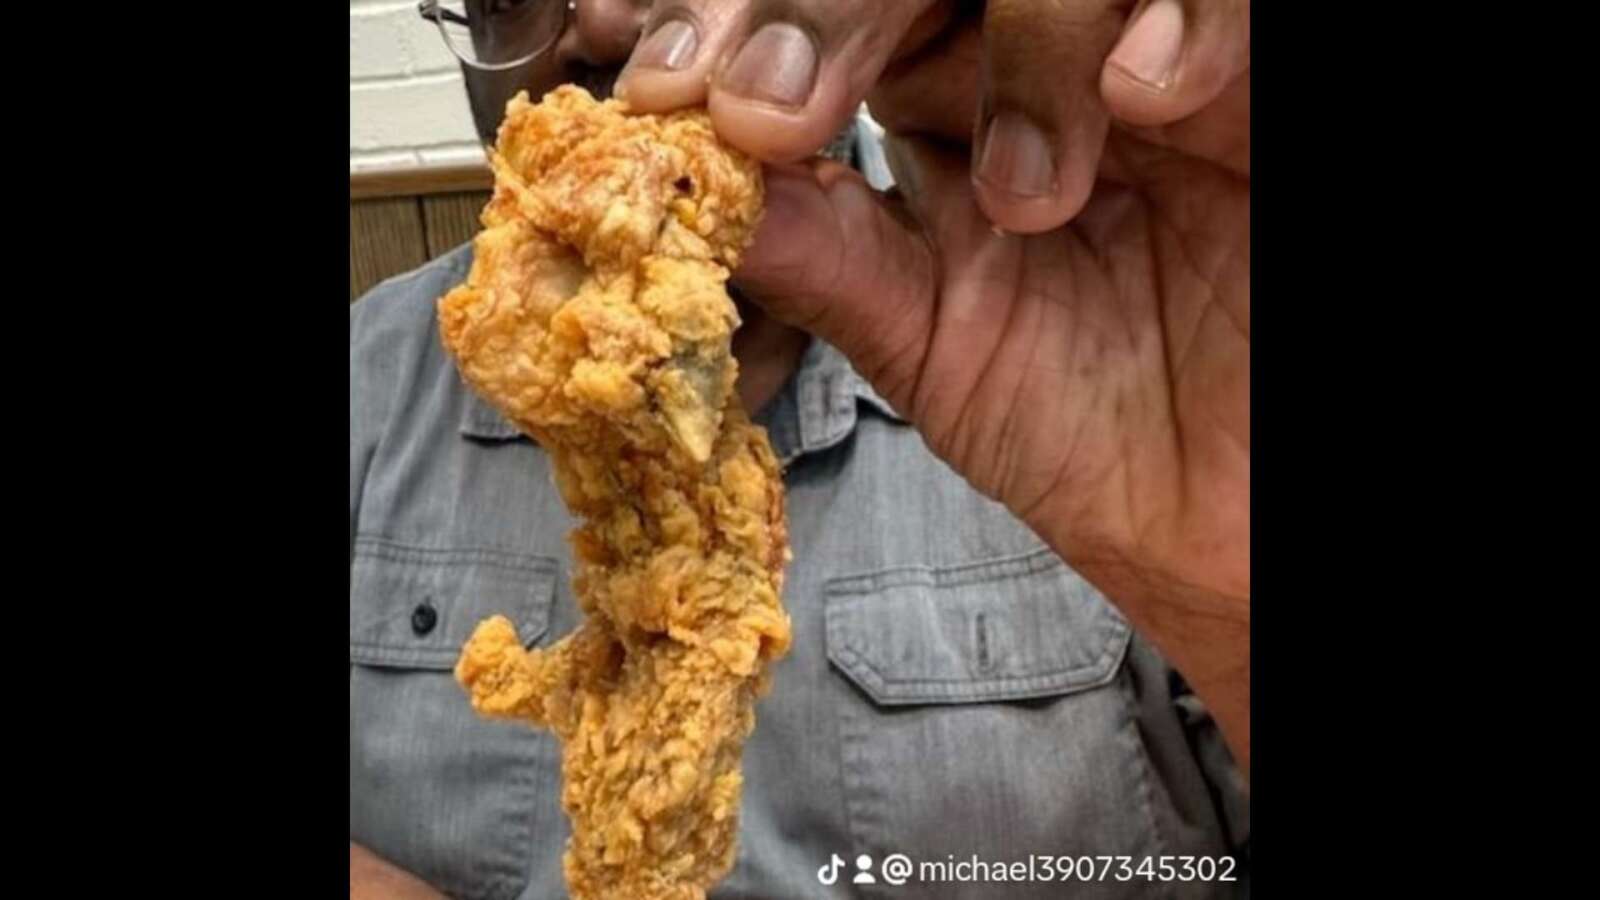 fried chicken from popeyes, merry christmas! : r/pics